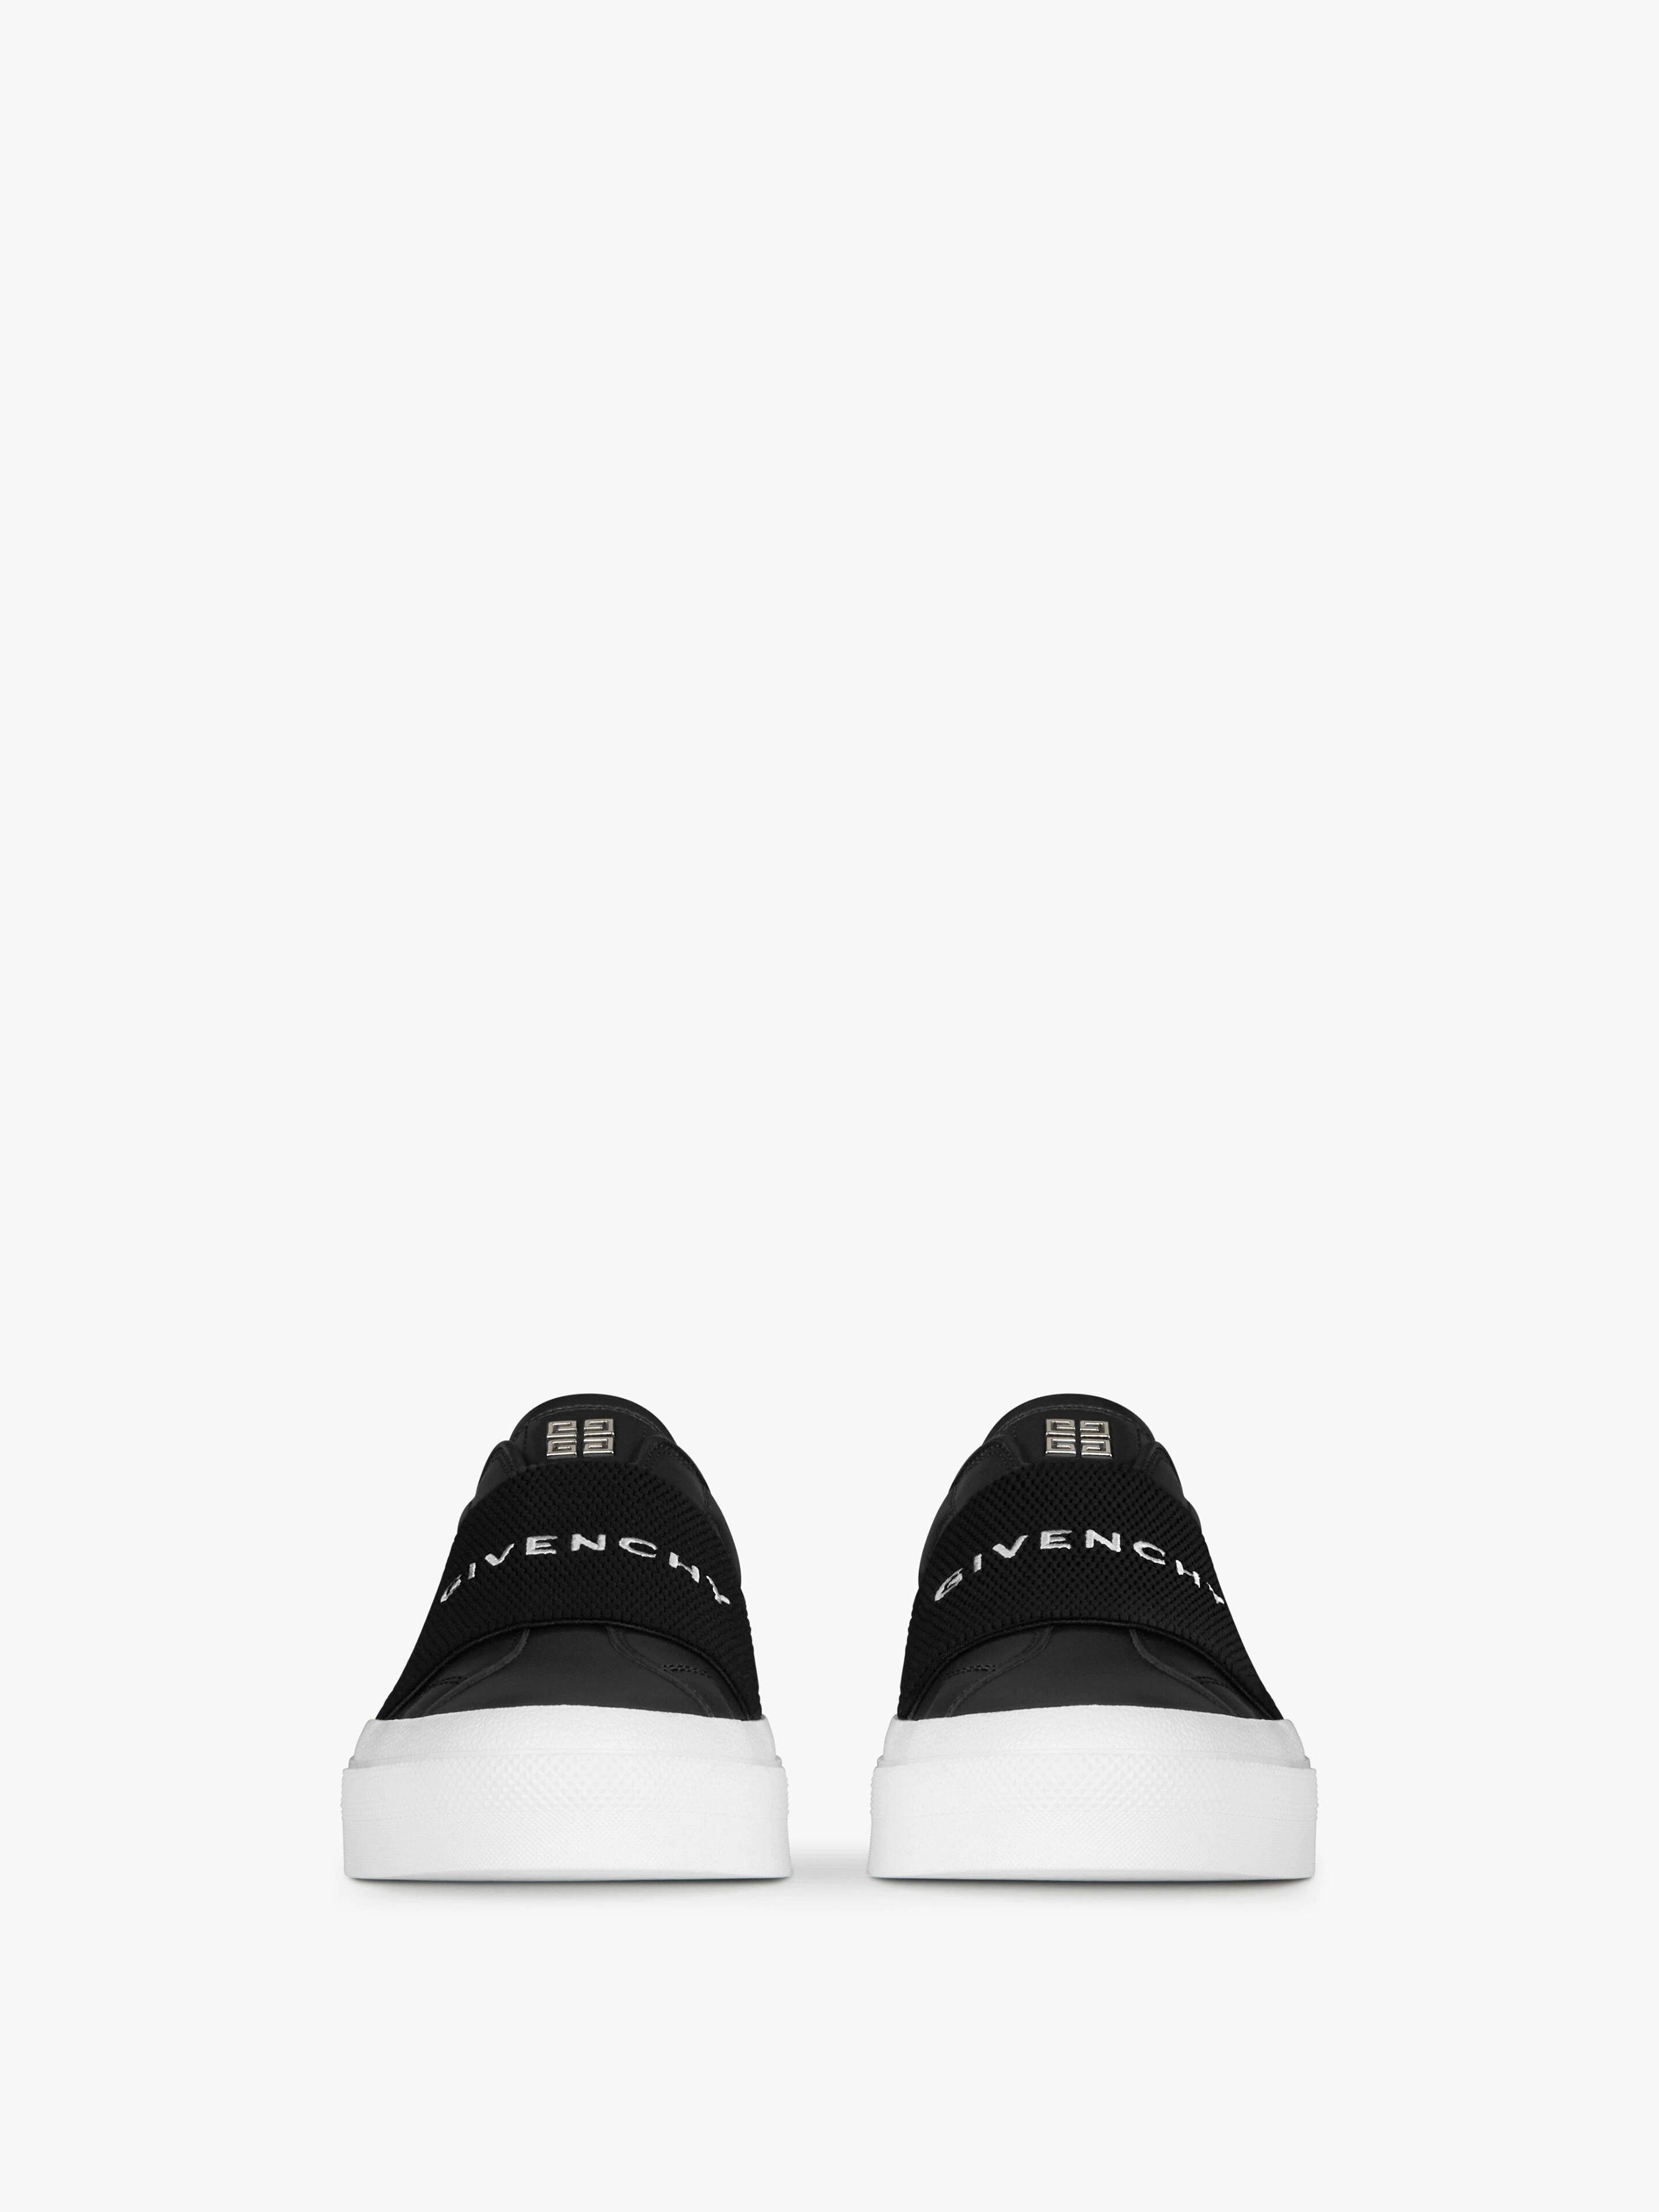 CITY SPORT SNEAKERS IN LEATHER WITH GIVENCHY STRAP - 2